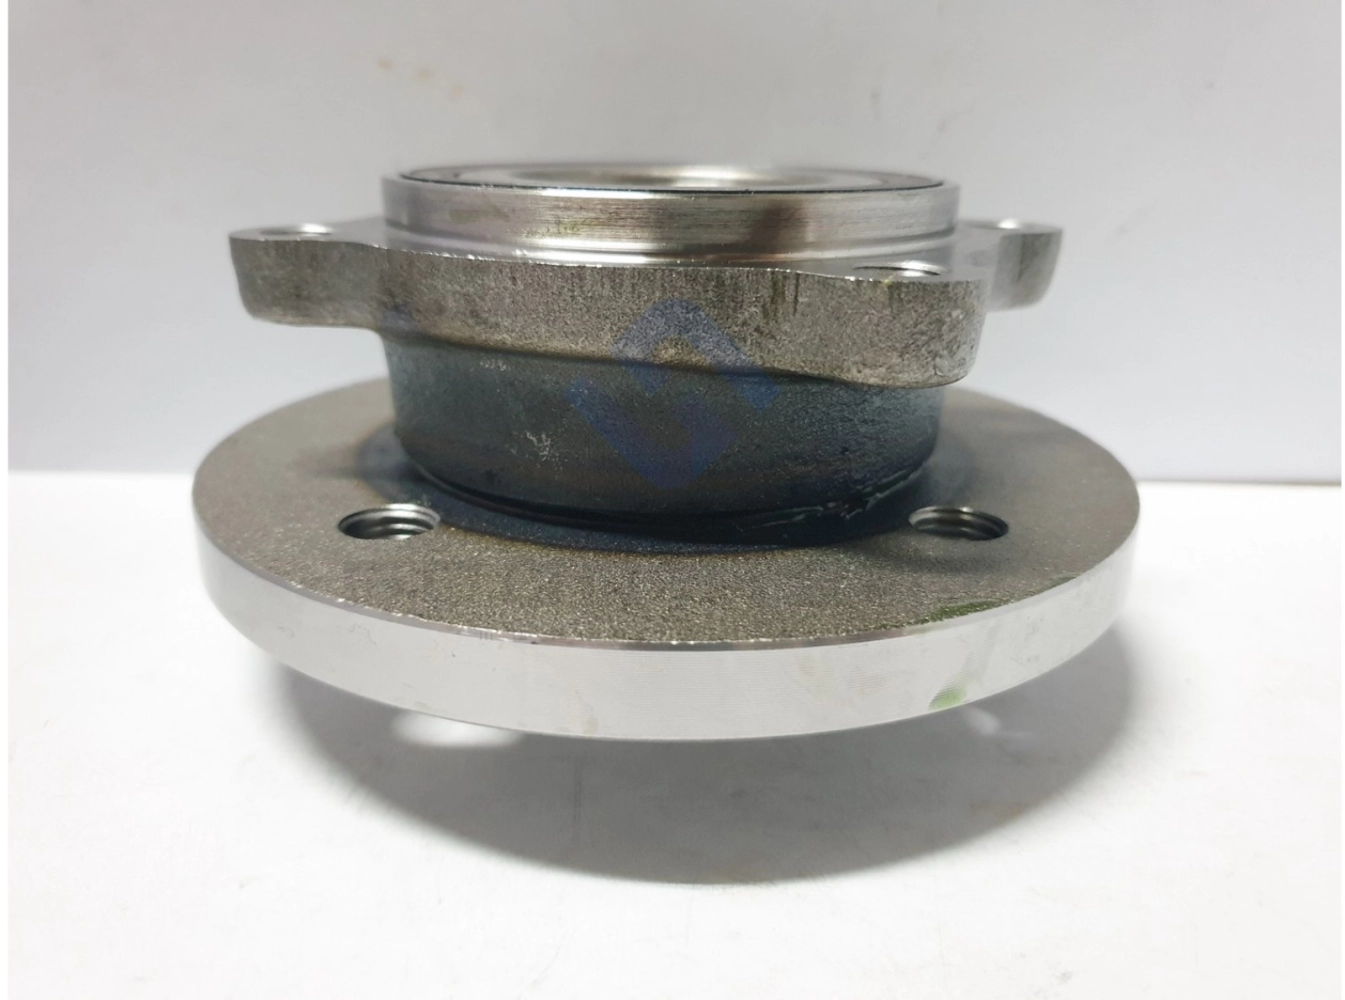 MINI R50, R52 and R53 - Front Wheel Bearing (FKG)